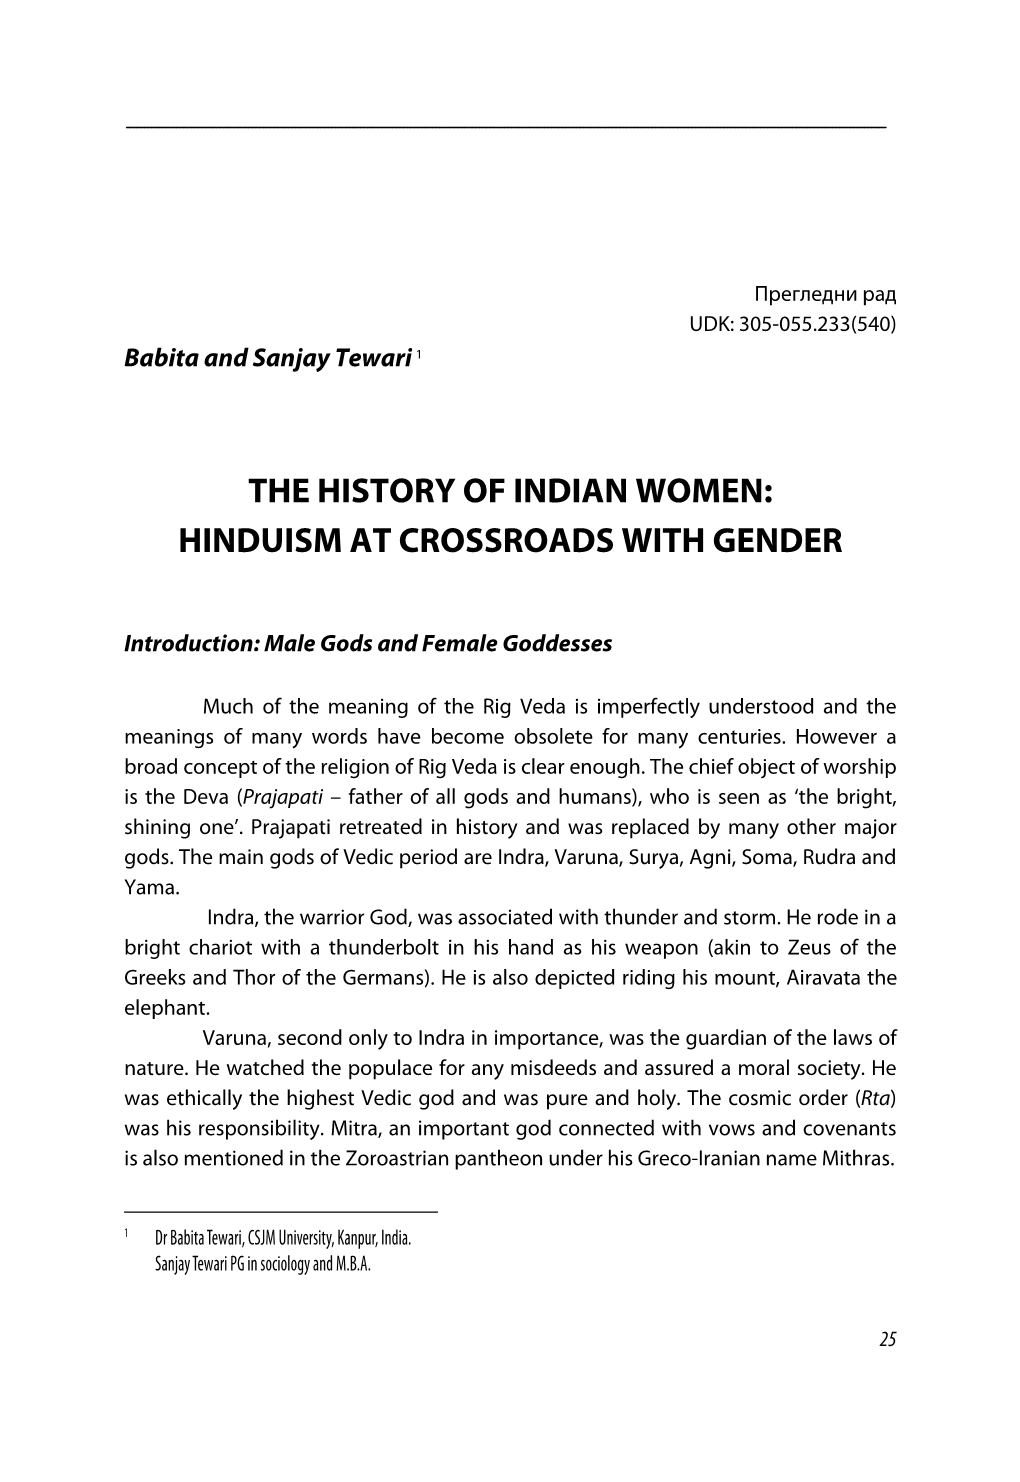 The History of Indian Women: Hinduism at Crossroads with Gender